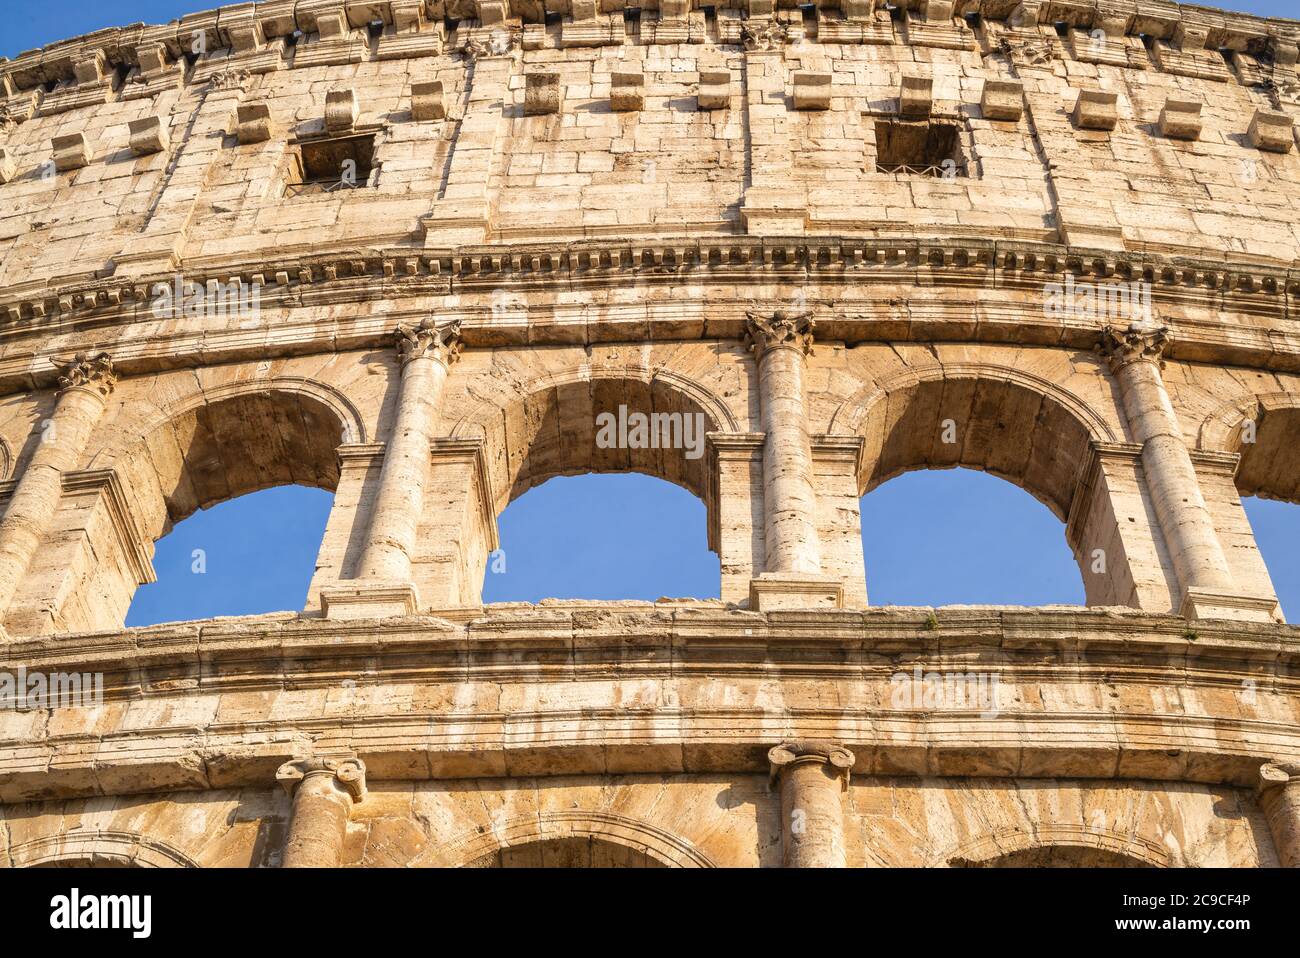 Graphic close-up of a section of the Coliseum / Colosseum set against blue sky in Rome, Italy Stock Photo